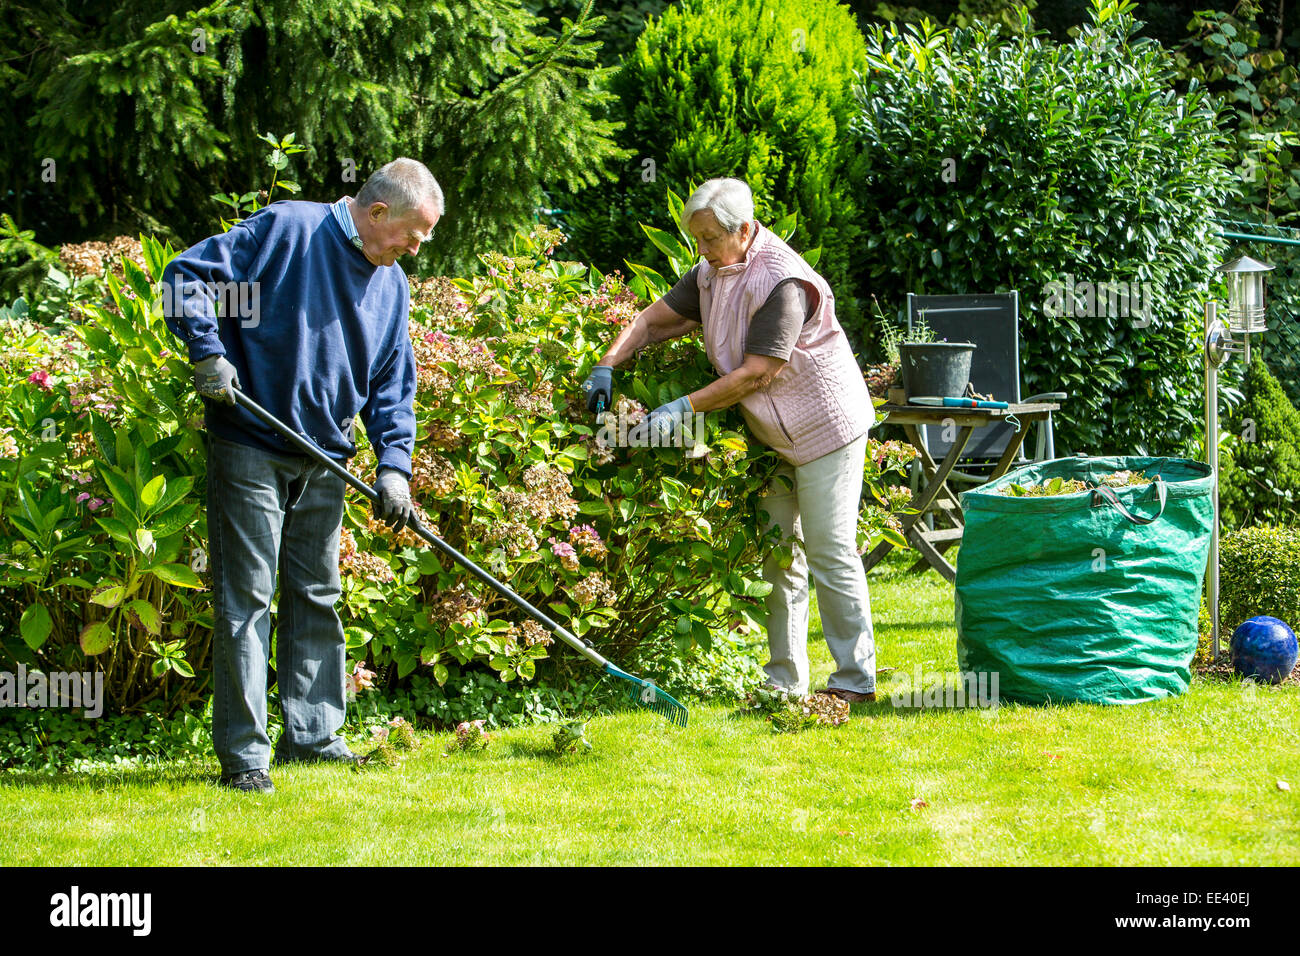 Seniors, elderly woman and her husband, in his 70s, working in the garden, Stock Photo